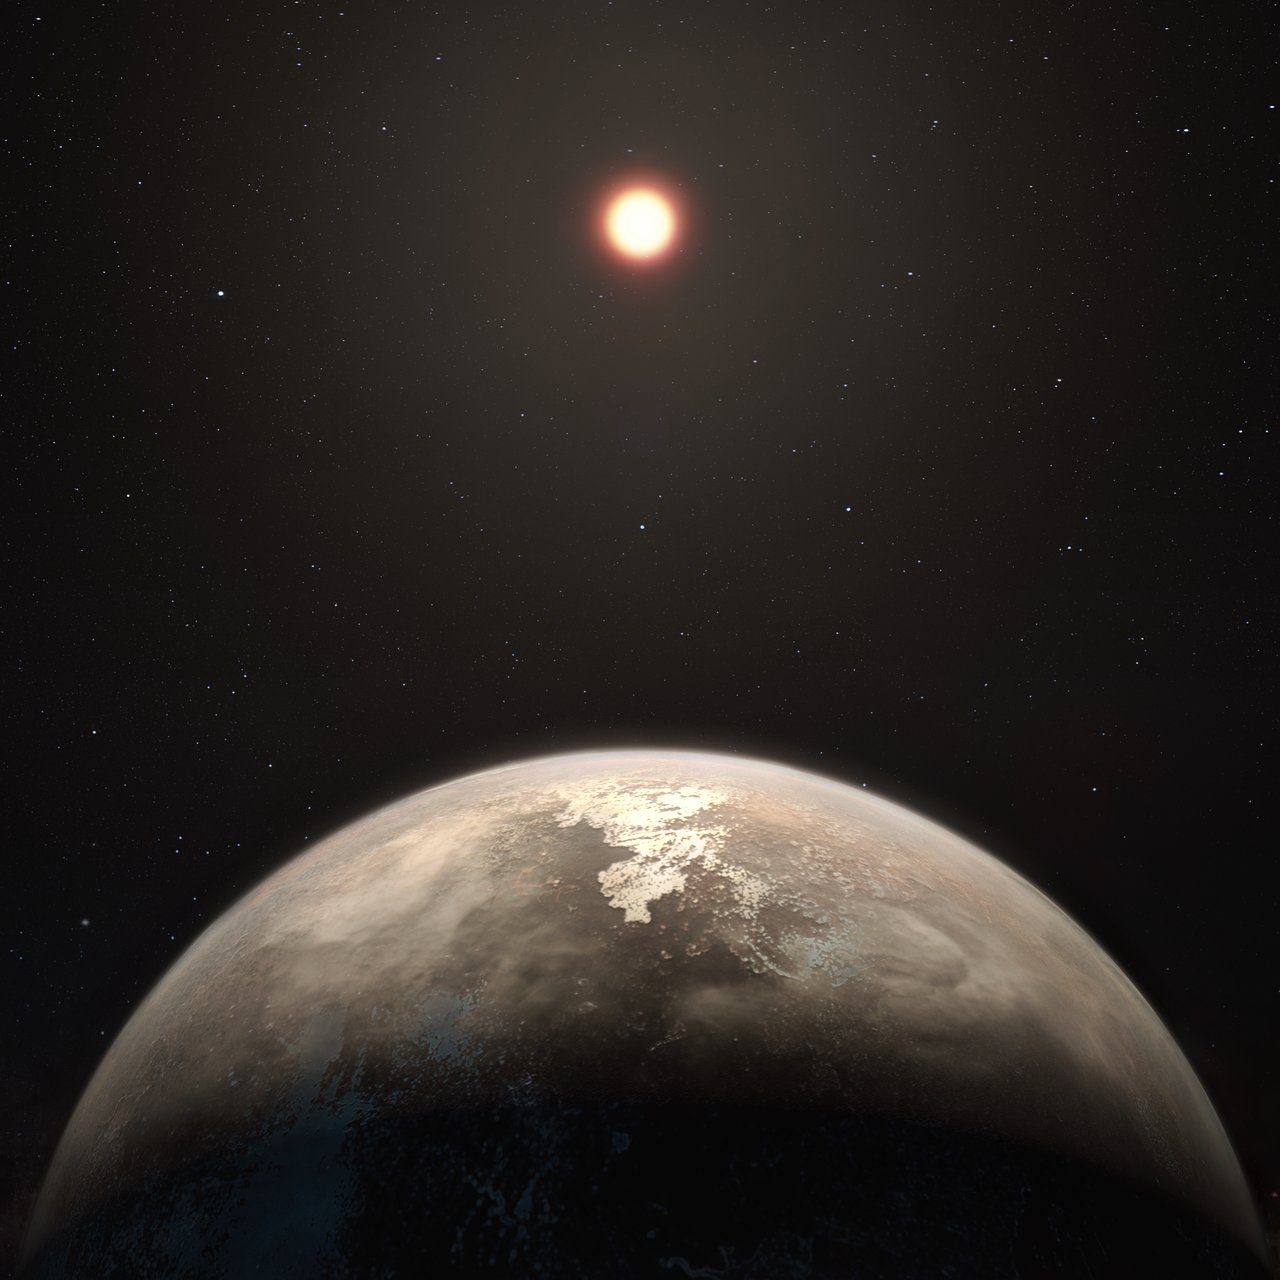 ANYONE THERE? This artist's impression shows the temperate planet Ross 128 b, with its red dwarf parent star in the background. ESO/M. Kornmesser 